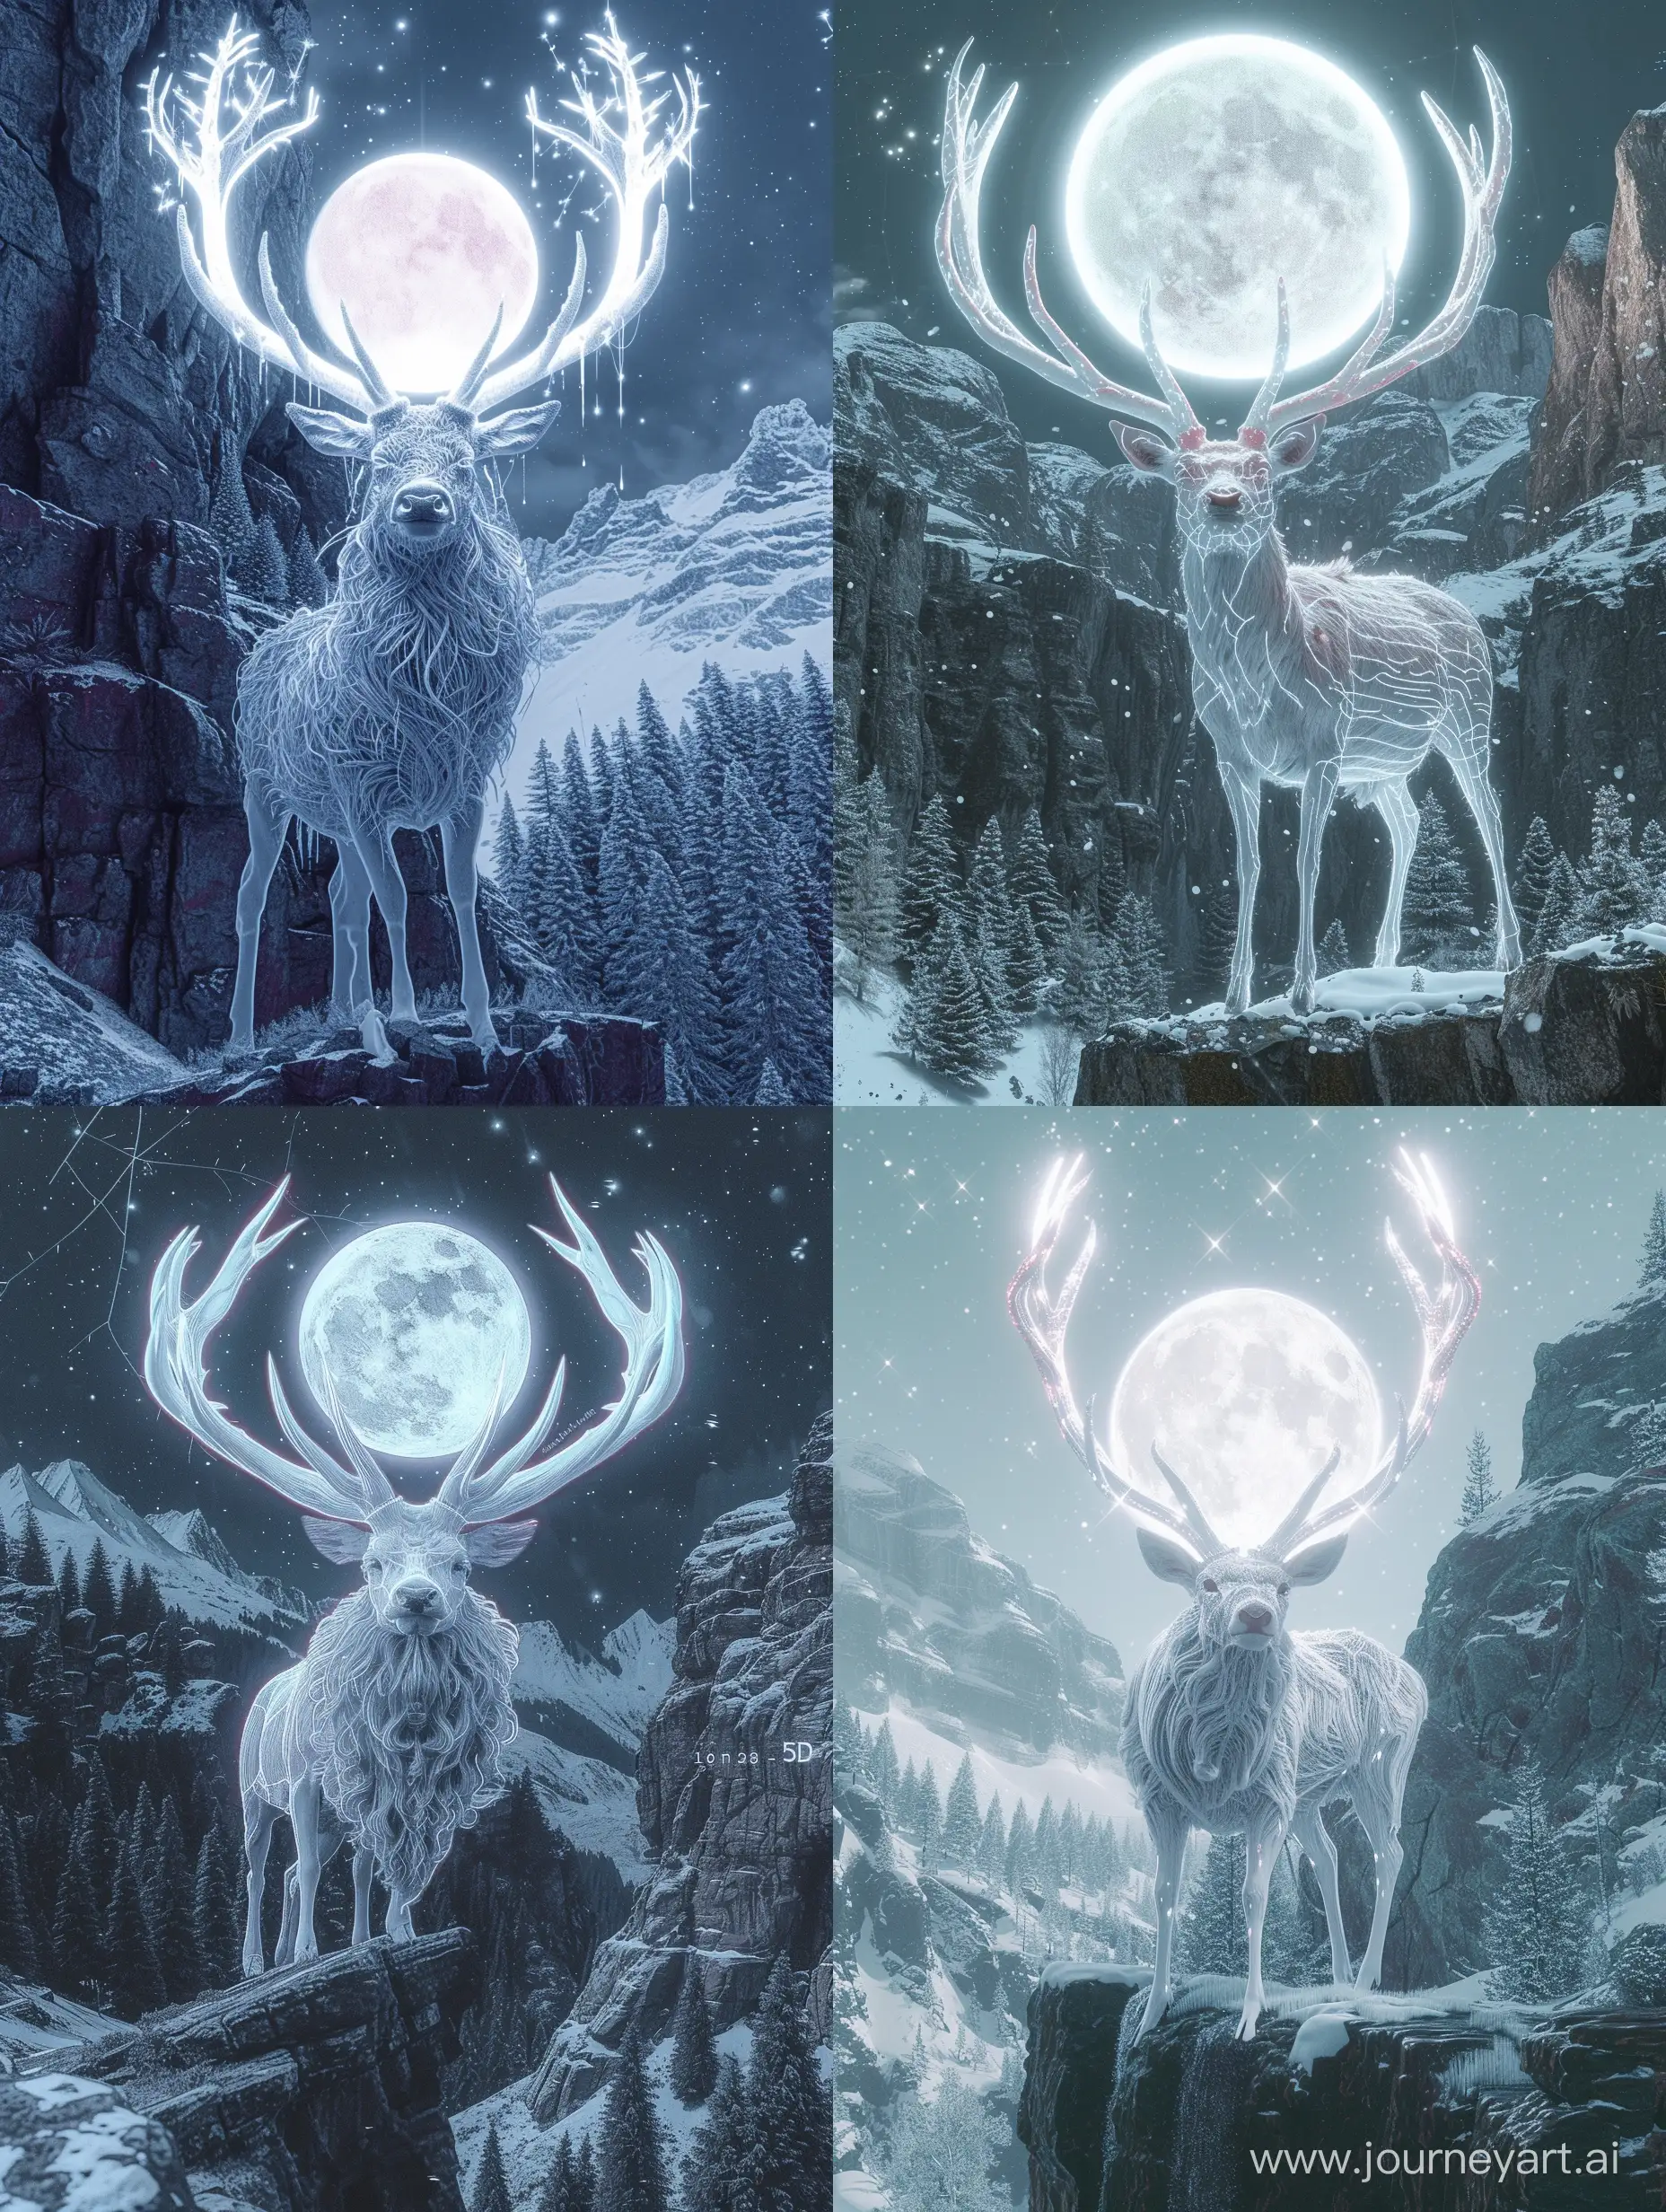 Majestic-White-Deer-with-Moonlit-Antlers-on-Cliff